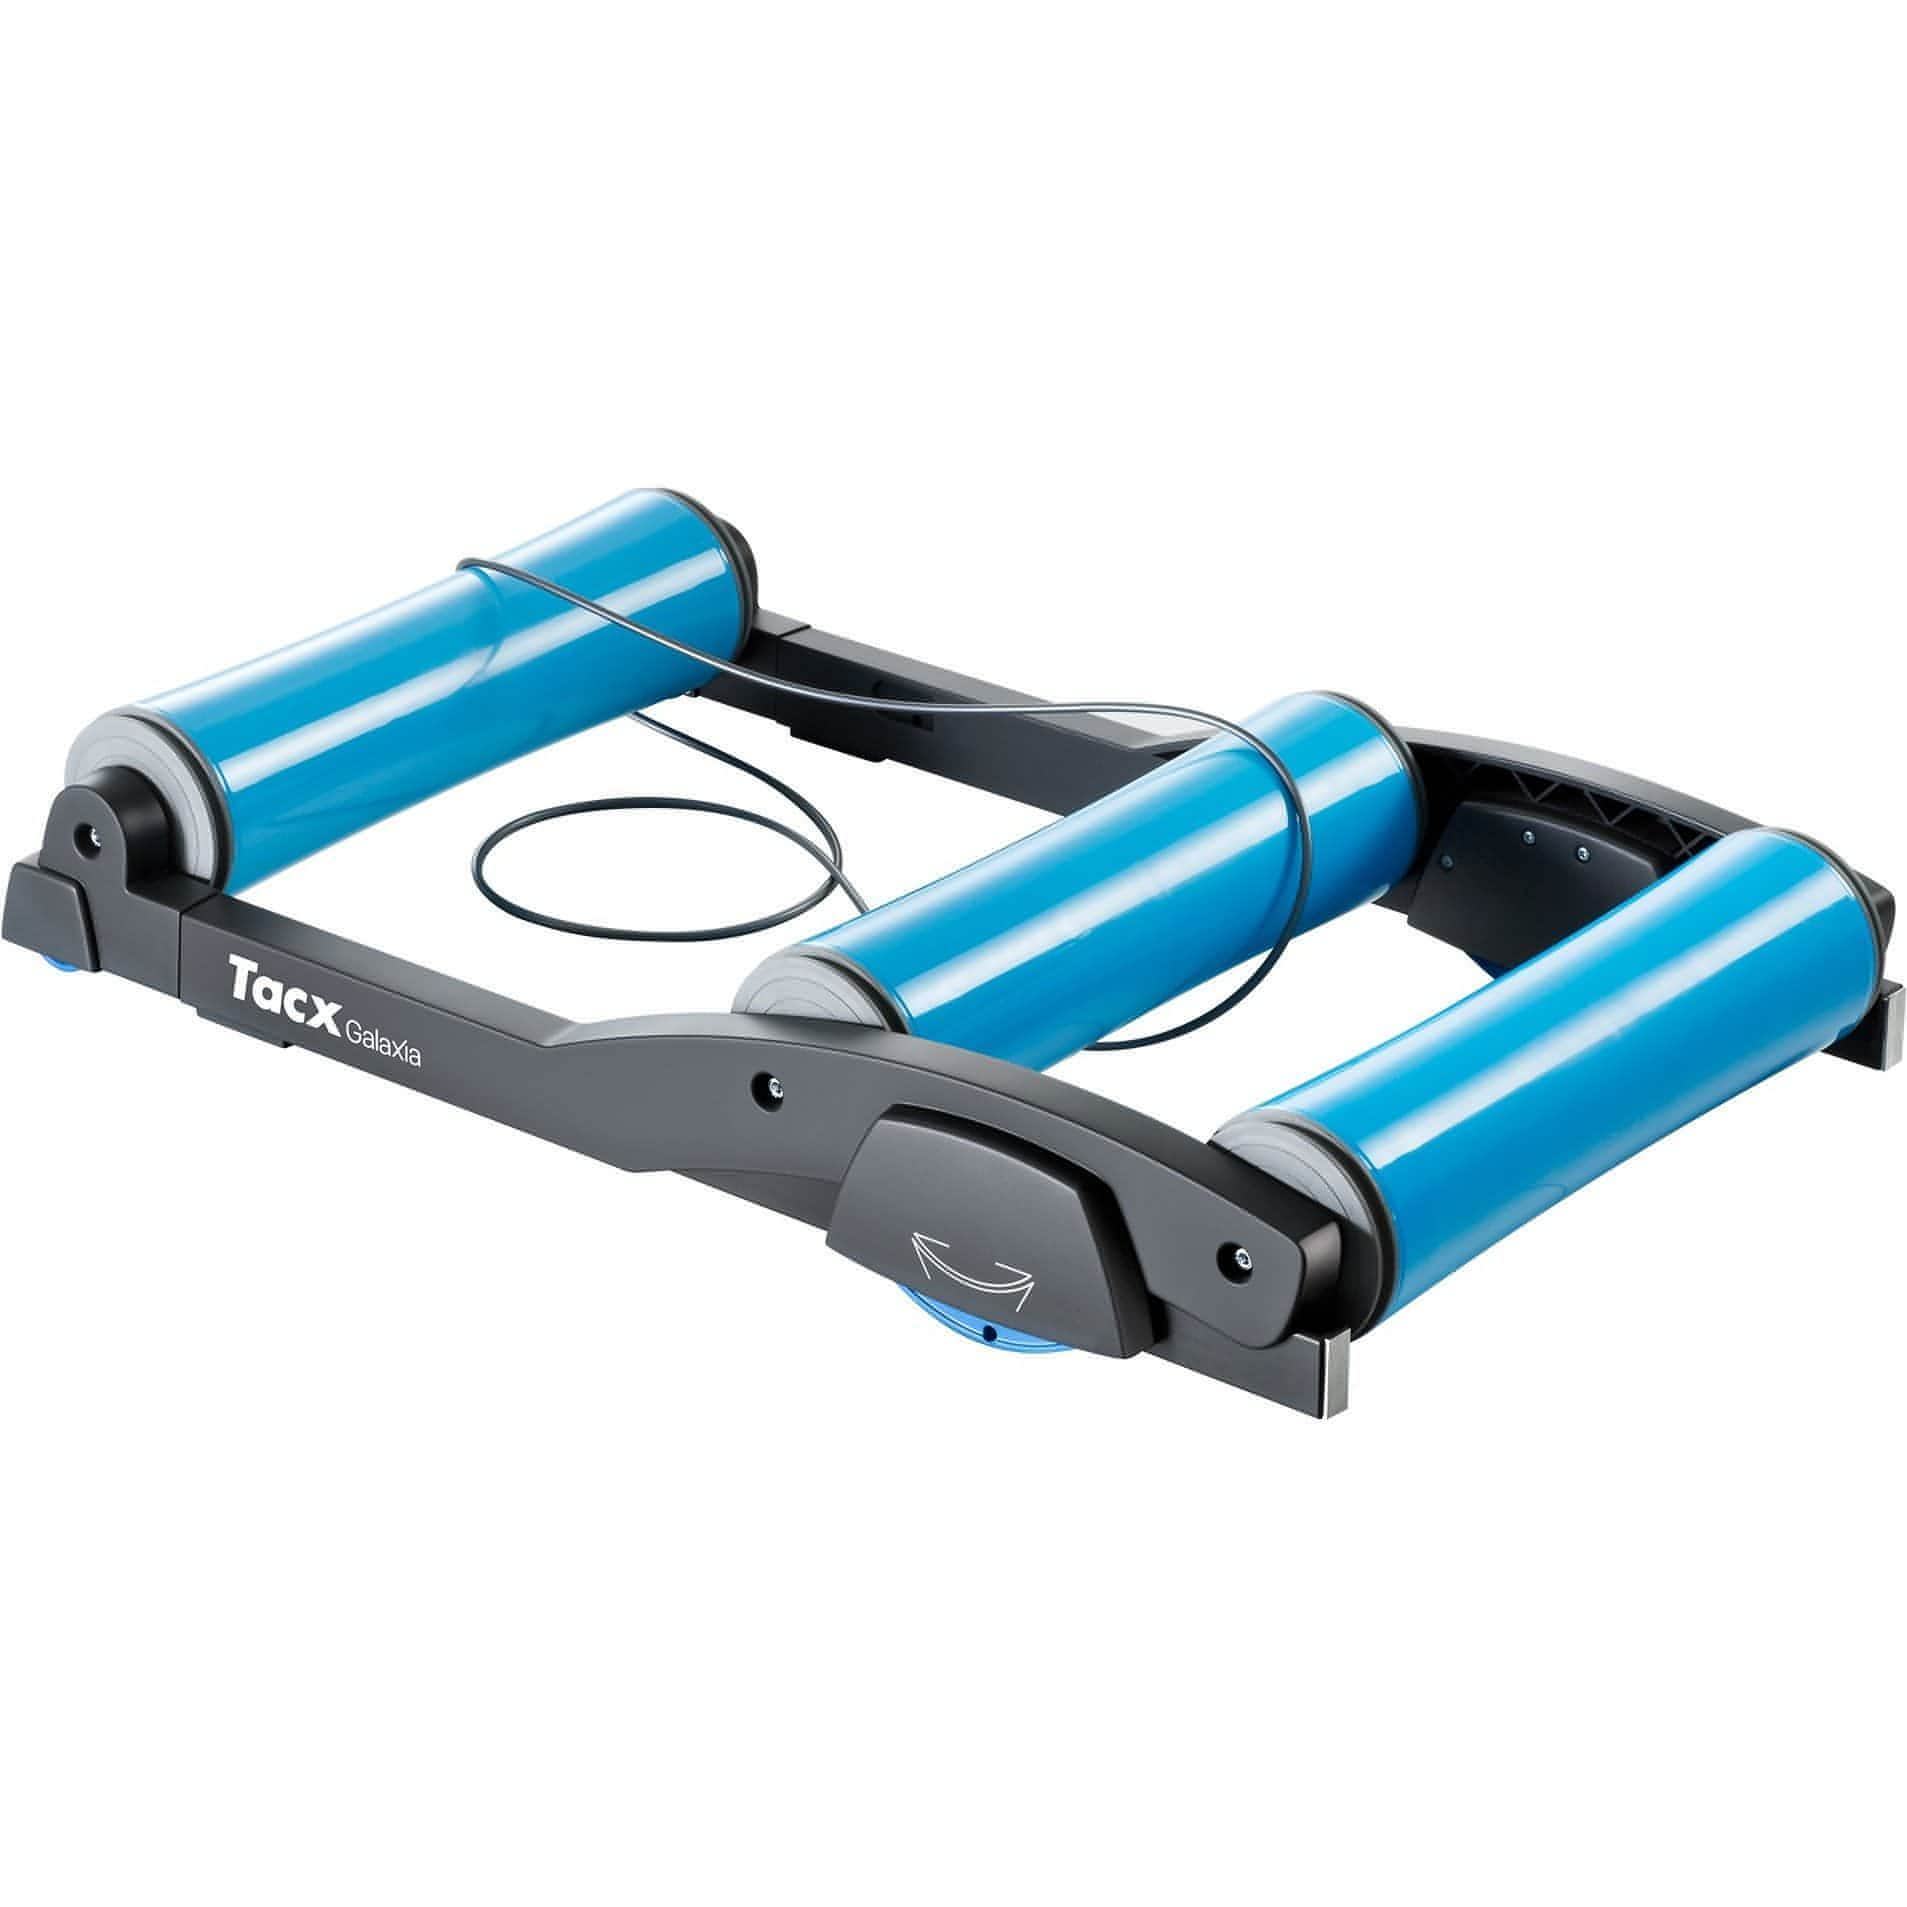 Tacx Galaxia Advanced Rollers Trainer - Blue 753759254933 - Start Fitness